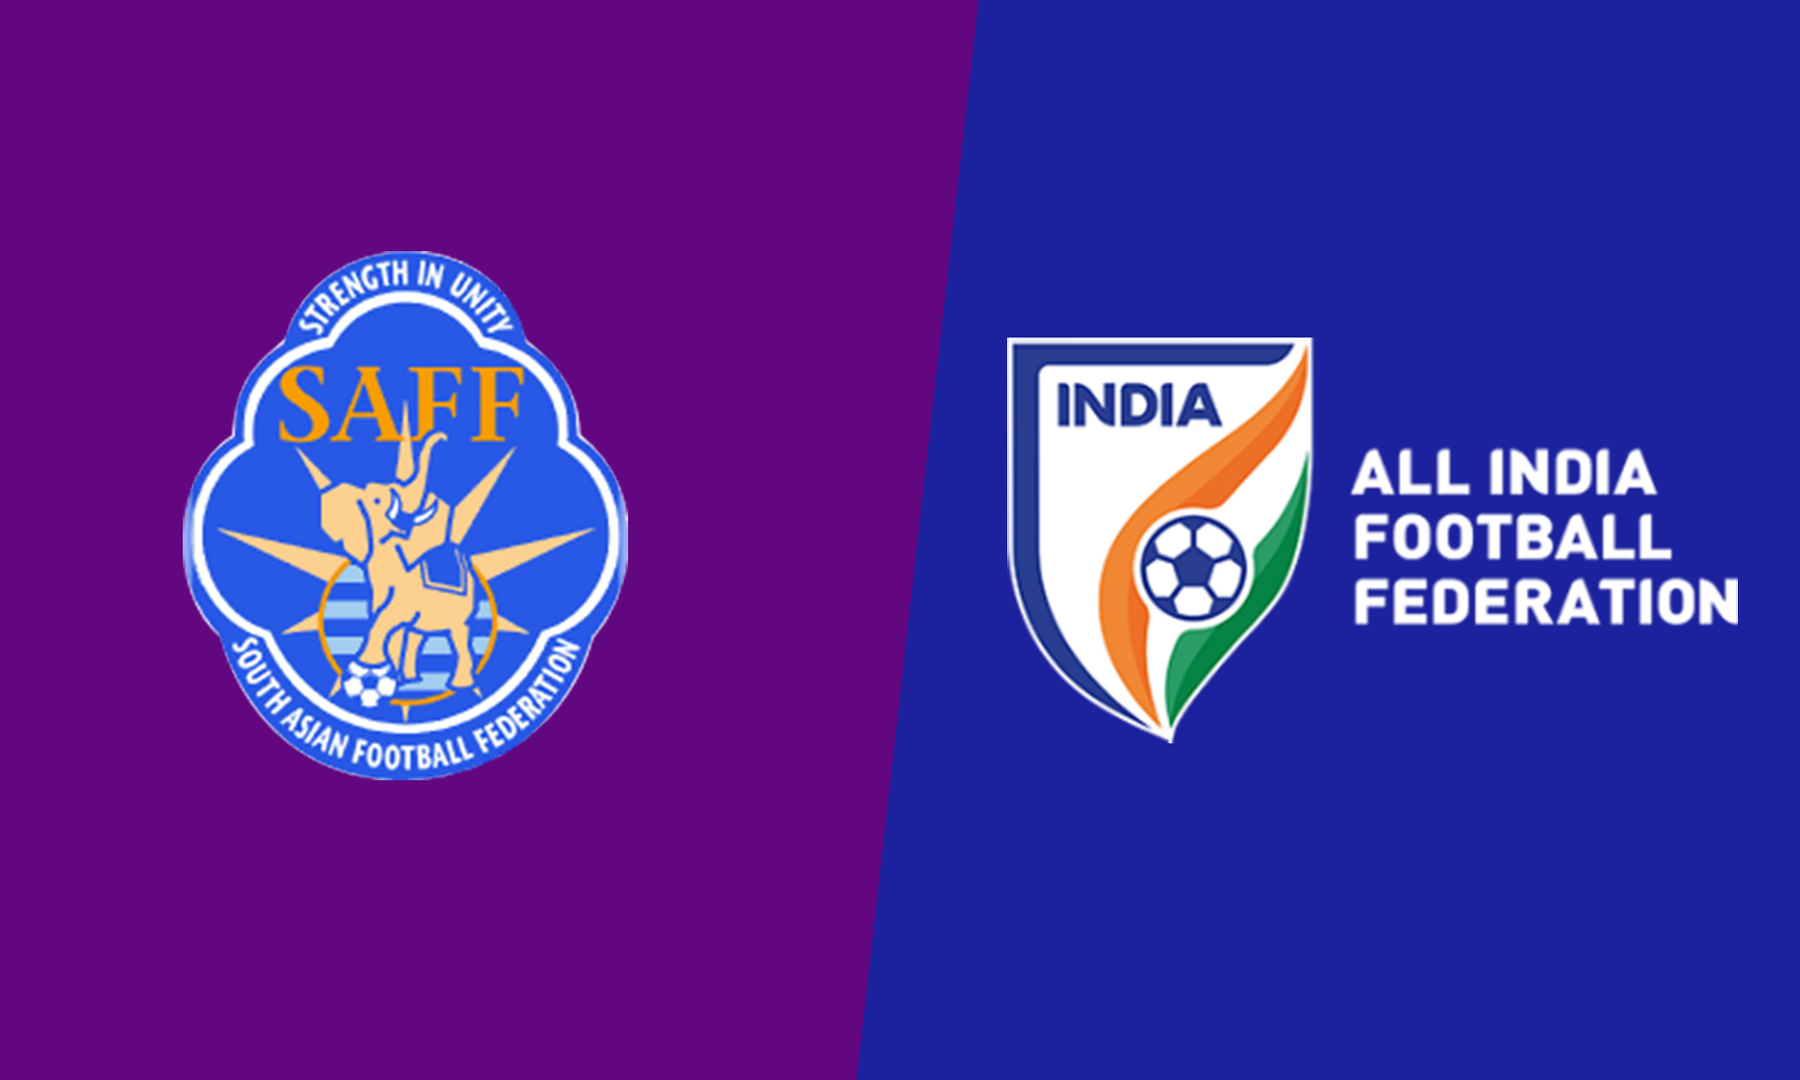 India to host SAFF Championship in June 2023